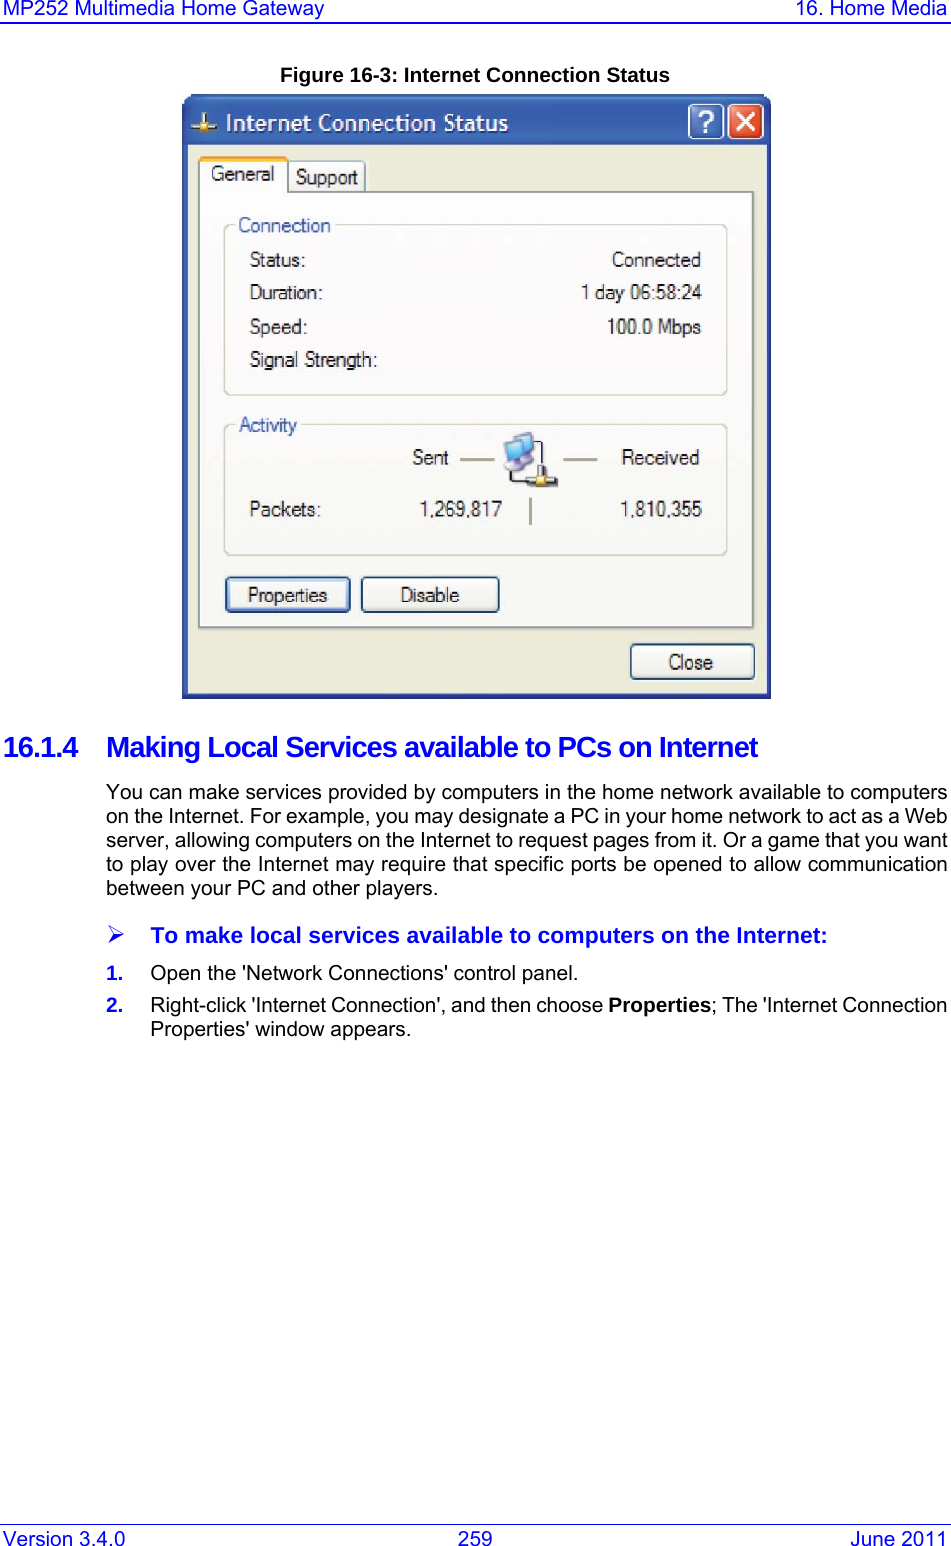 MP252 Multimedia Home Gateway  16. Home Media Version 3.4.0  259  June 2011 Figure 16-3: Internet Connection Status  16.1.4  Making Local Services available to PCs on Internet You can make services provided by computers in the home network available to computers on the Internet. For example, you may designate a PC in your home network to act as a Web server, allowing computers on the Internet to request pages from it. Or a game that you want to play over the Internet may require that specific ports be opened to allow communication between your PC and other players.  ¾ To make local services available to computers on the Internet: 1.  Open the &apos;Network Connections&apos; control panel. 2.  Right-click &apos;Internet Connection&apos;, and then choose Properties; The &apos;Internet Connection Properties&apos; window appears. 